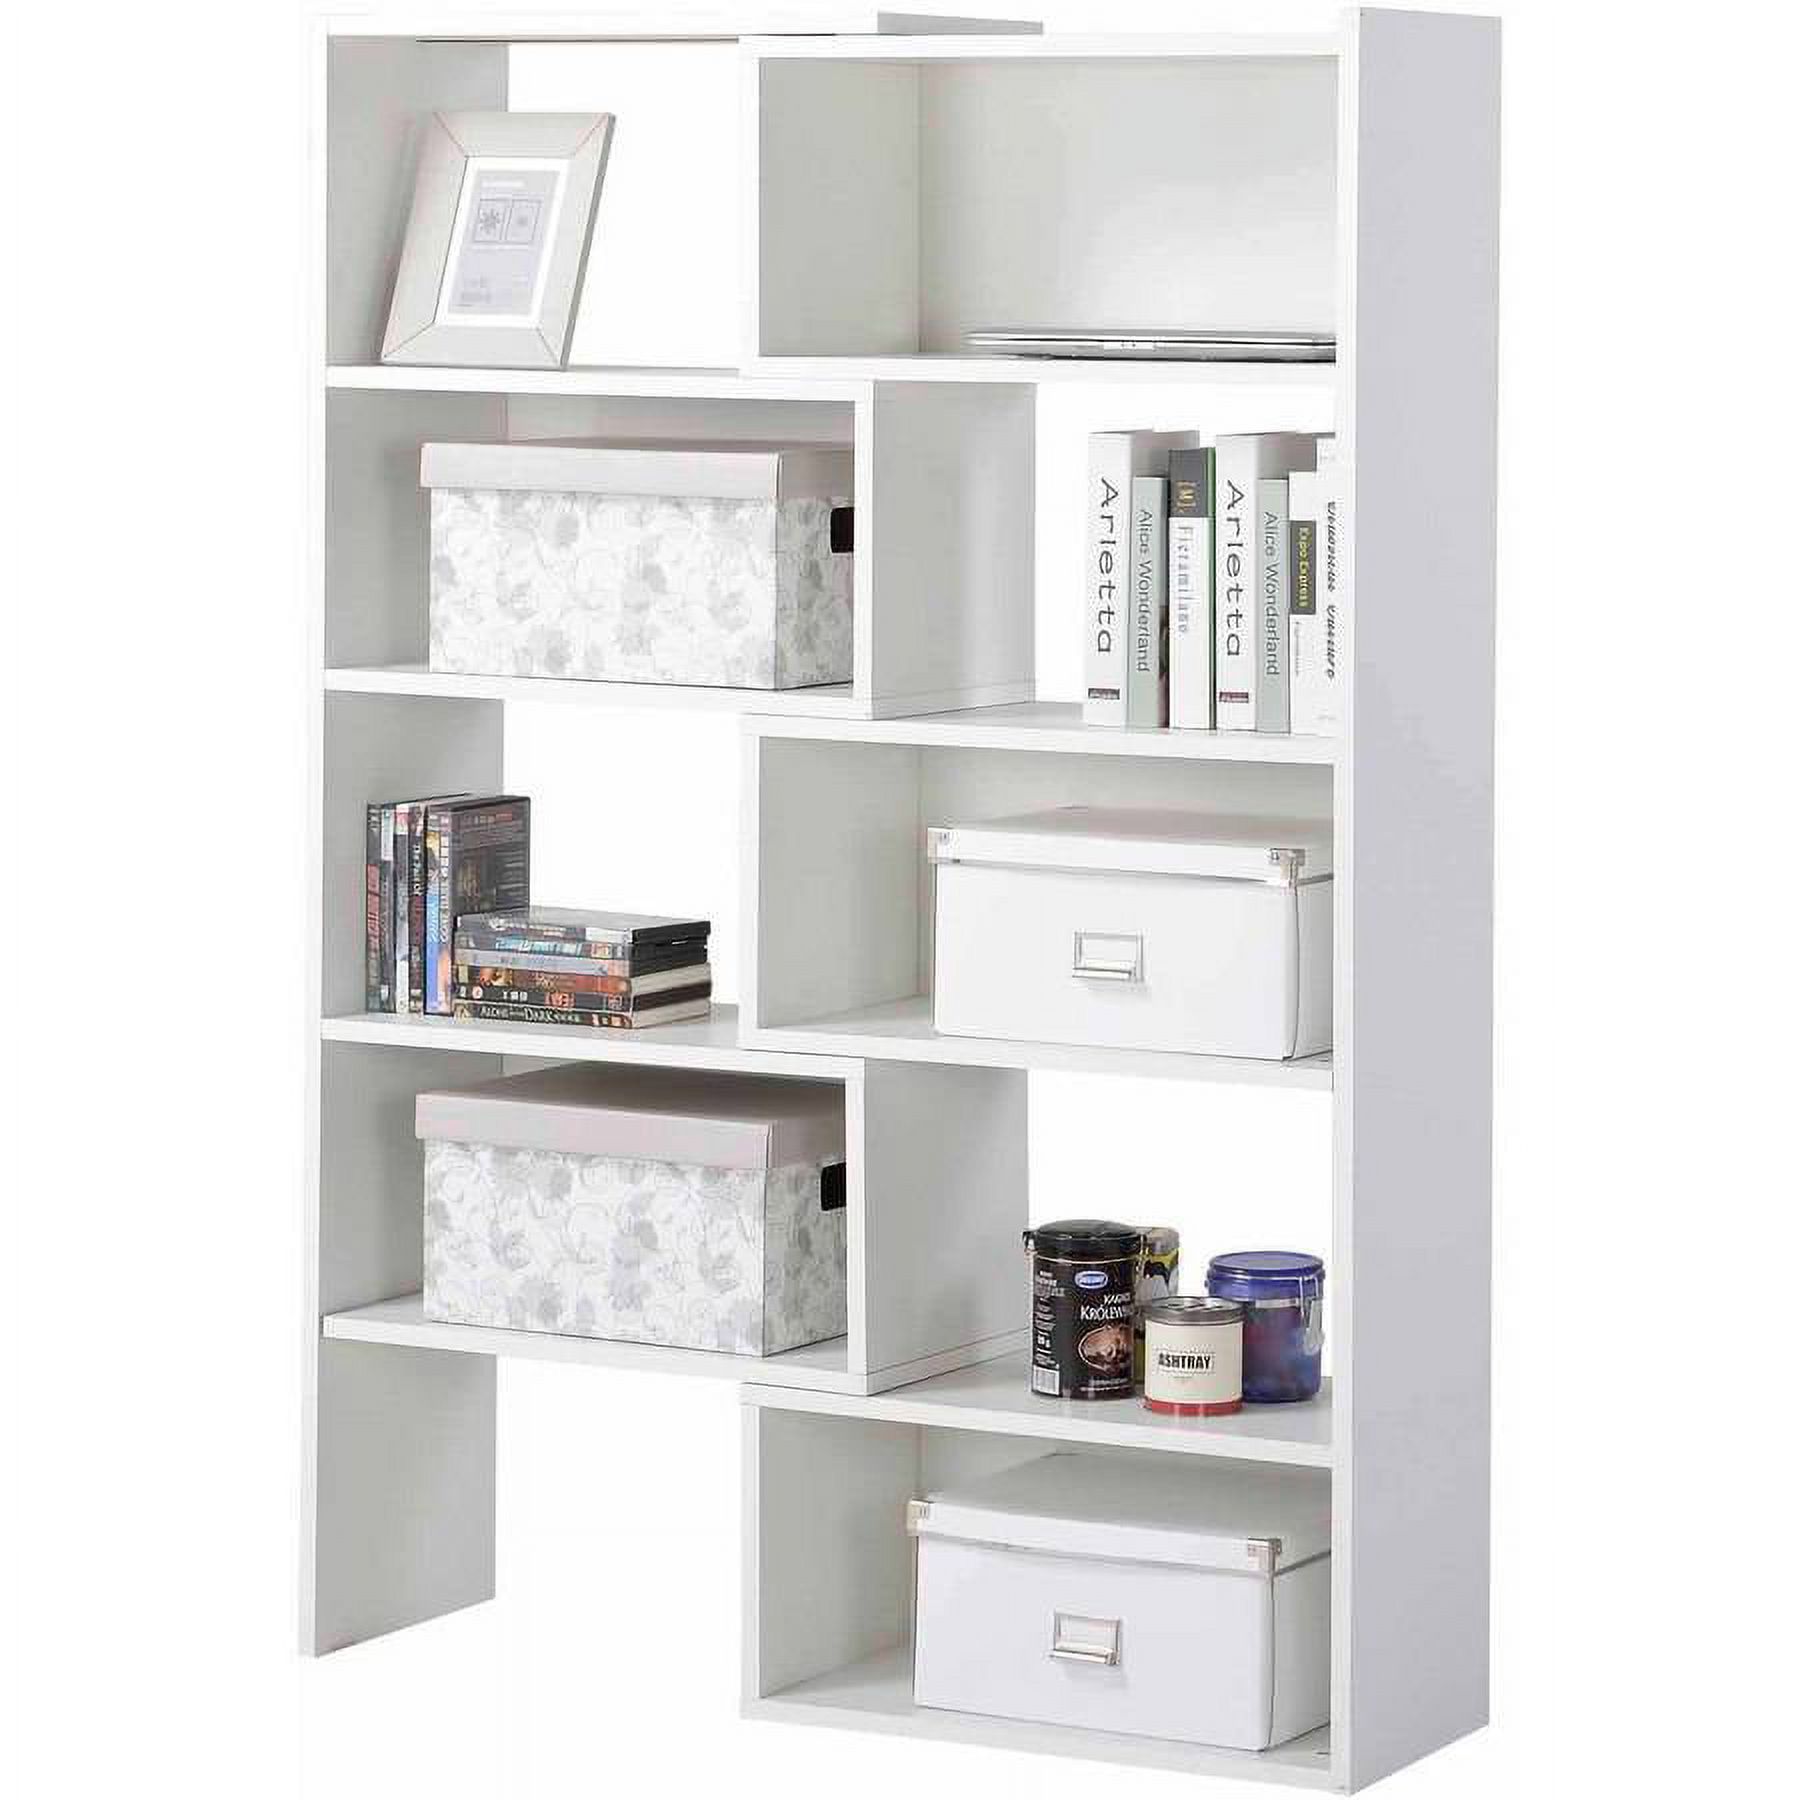 Homestar Flexible and Expandable Shelving Console, White - image 6 of 6